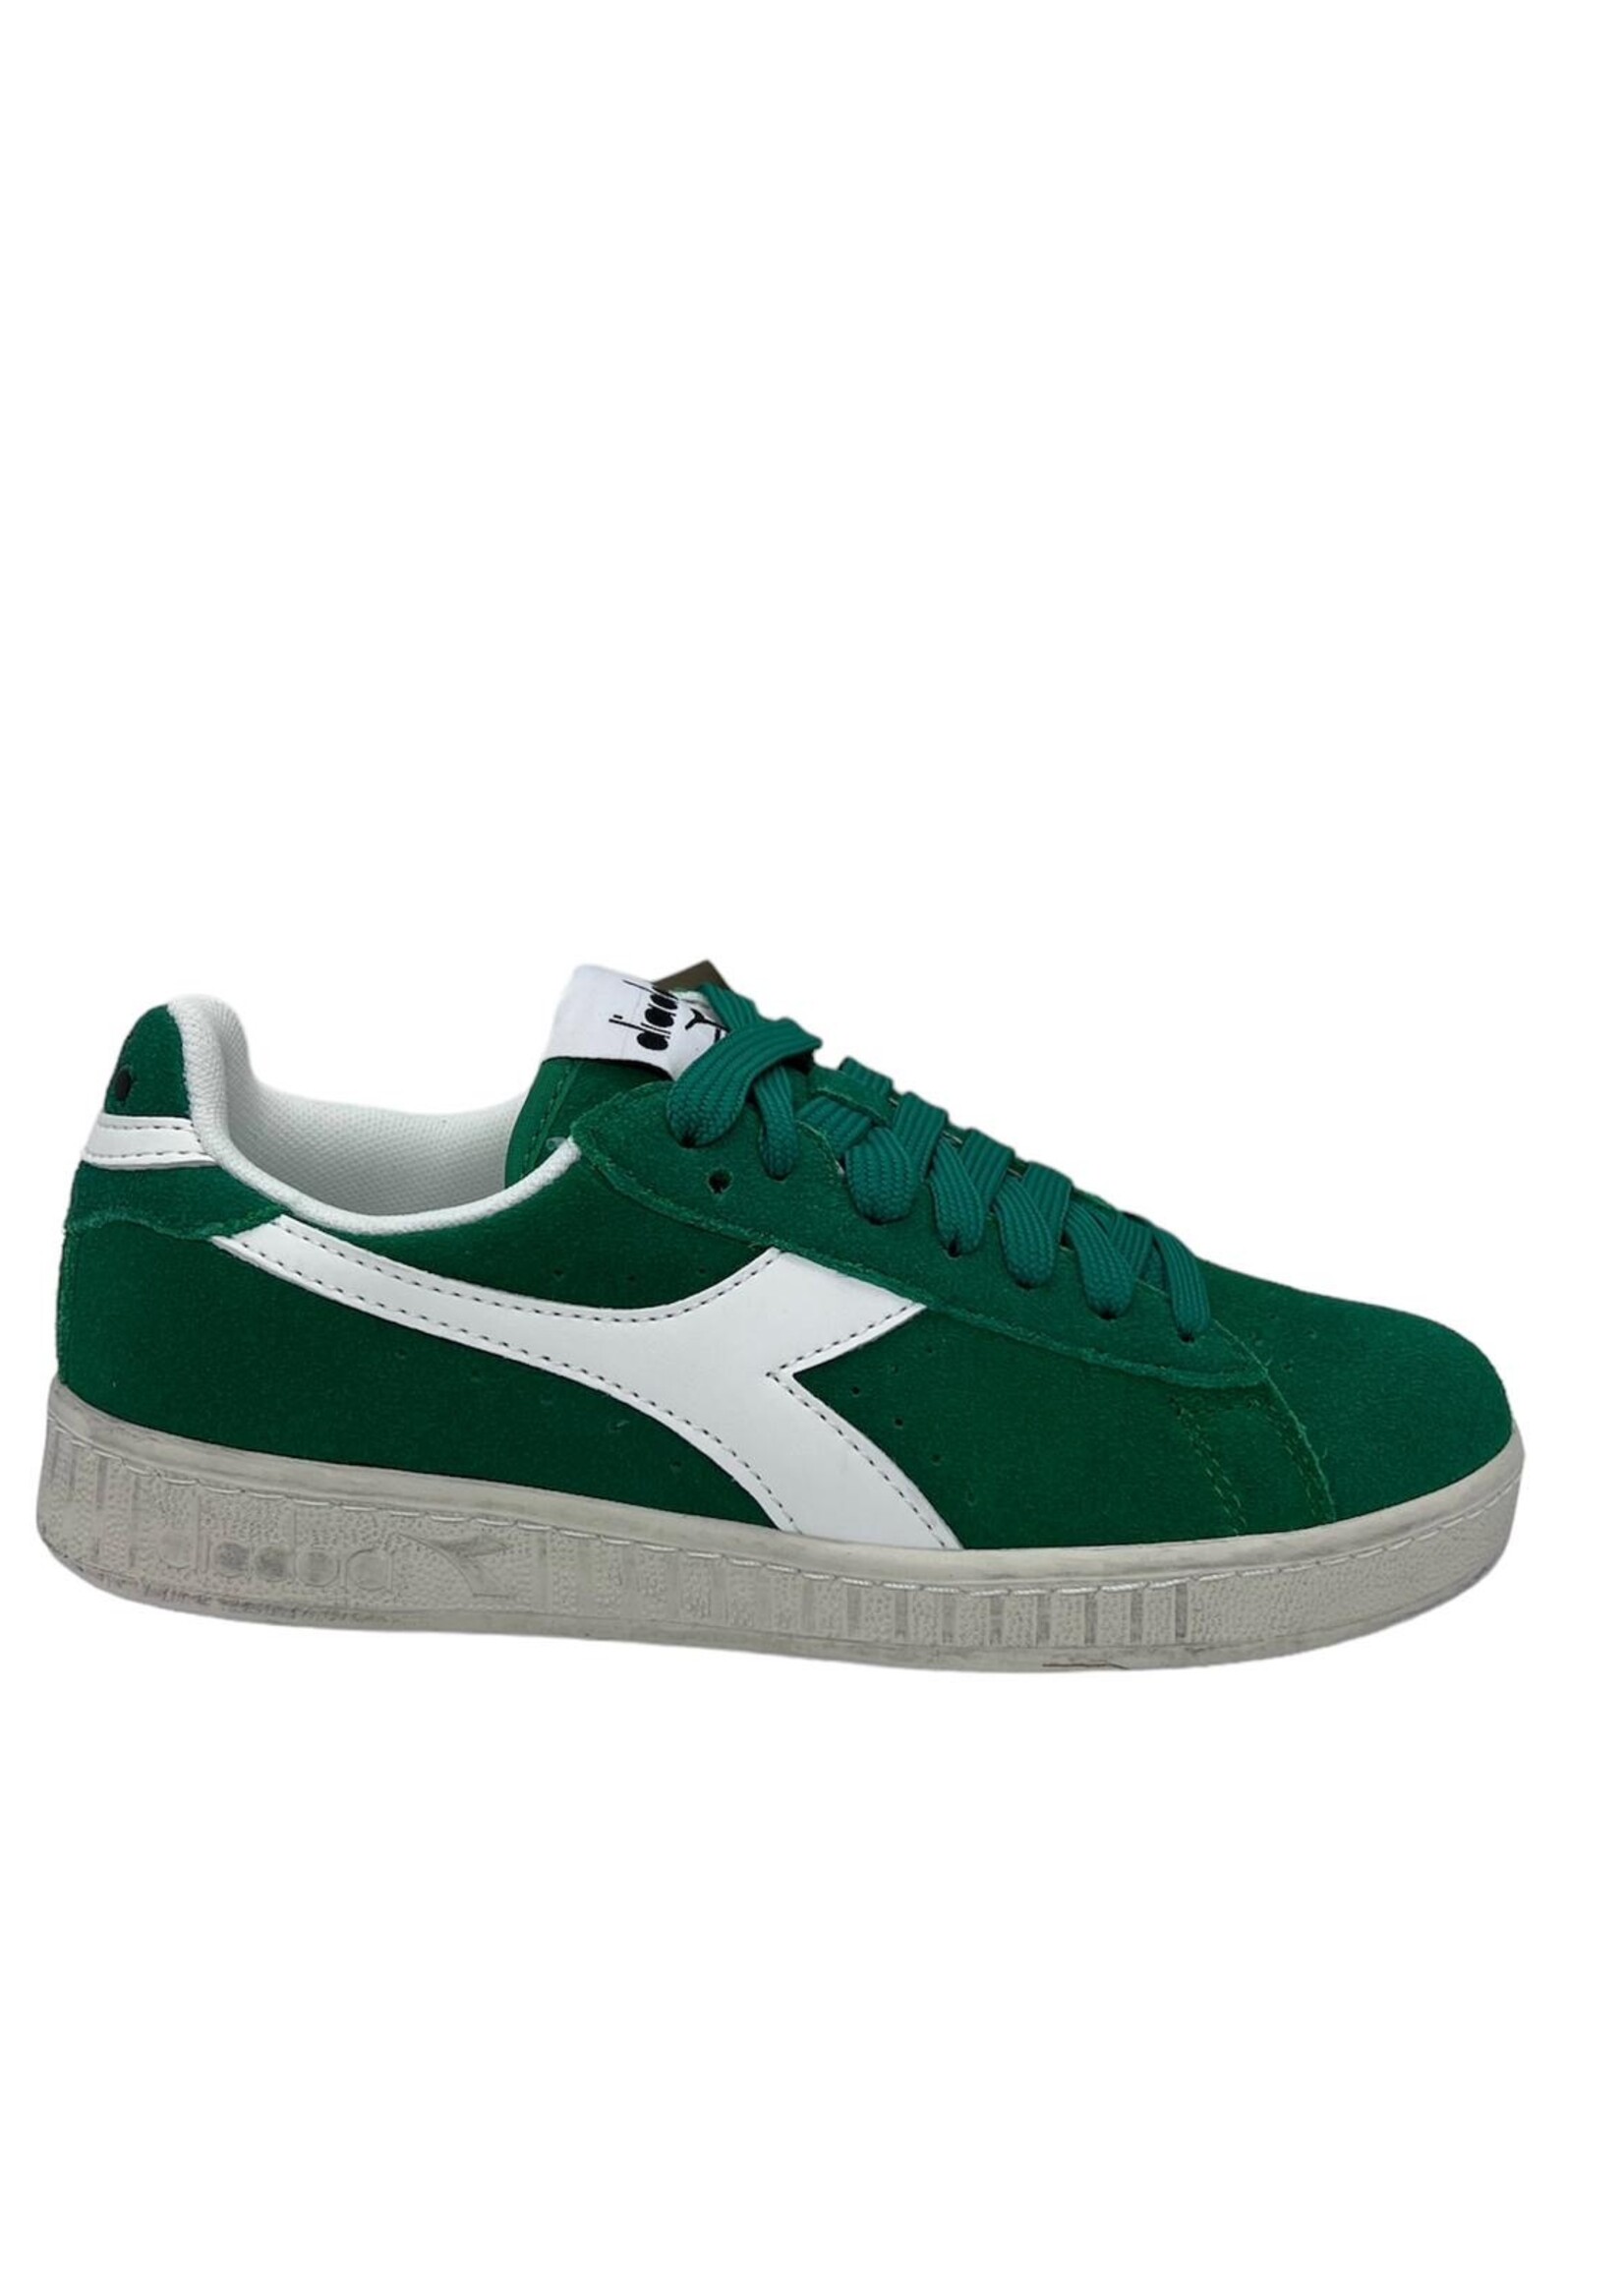 Diadora game L low suede waxed green peppermint